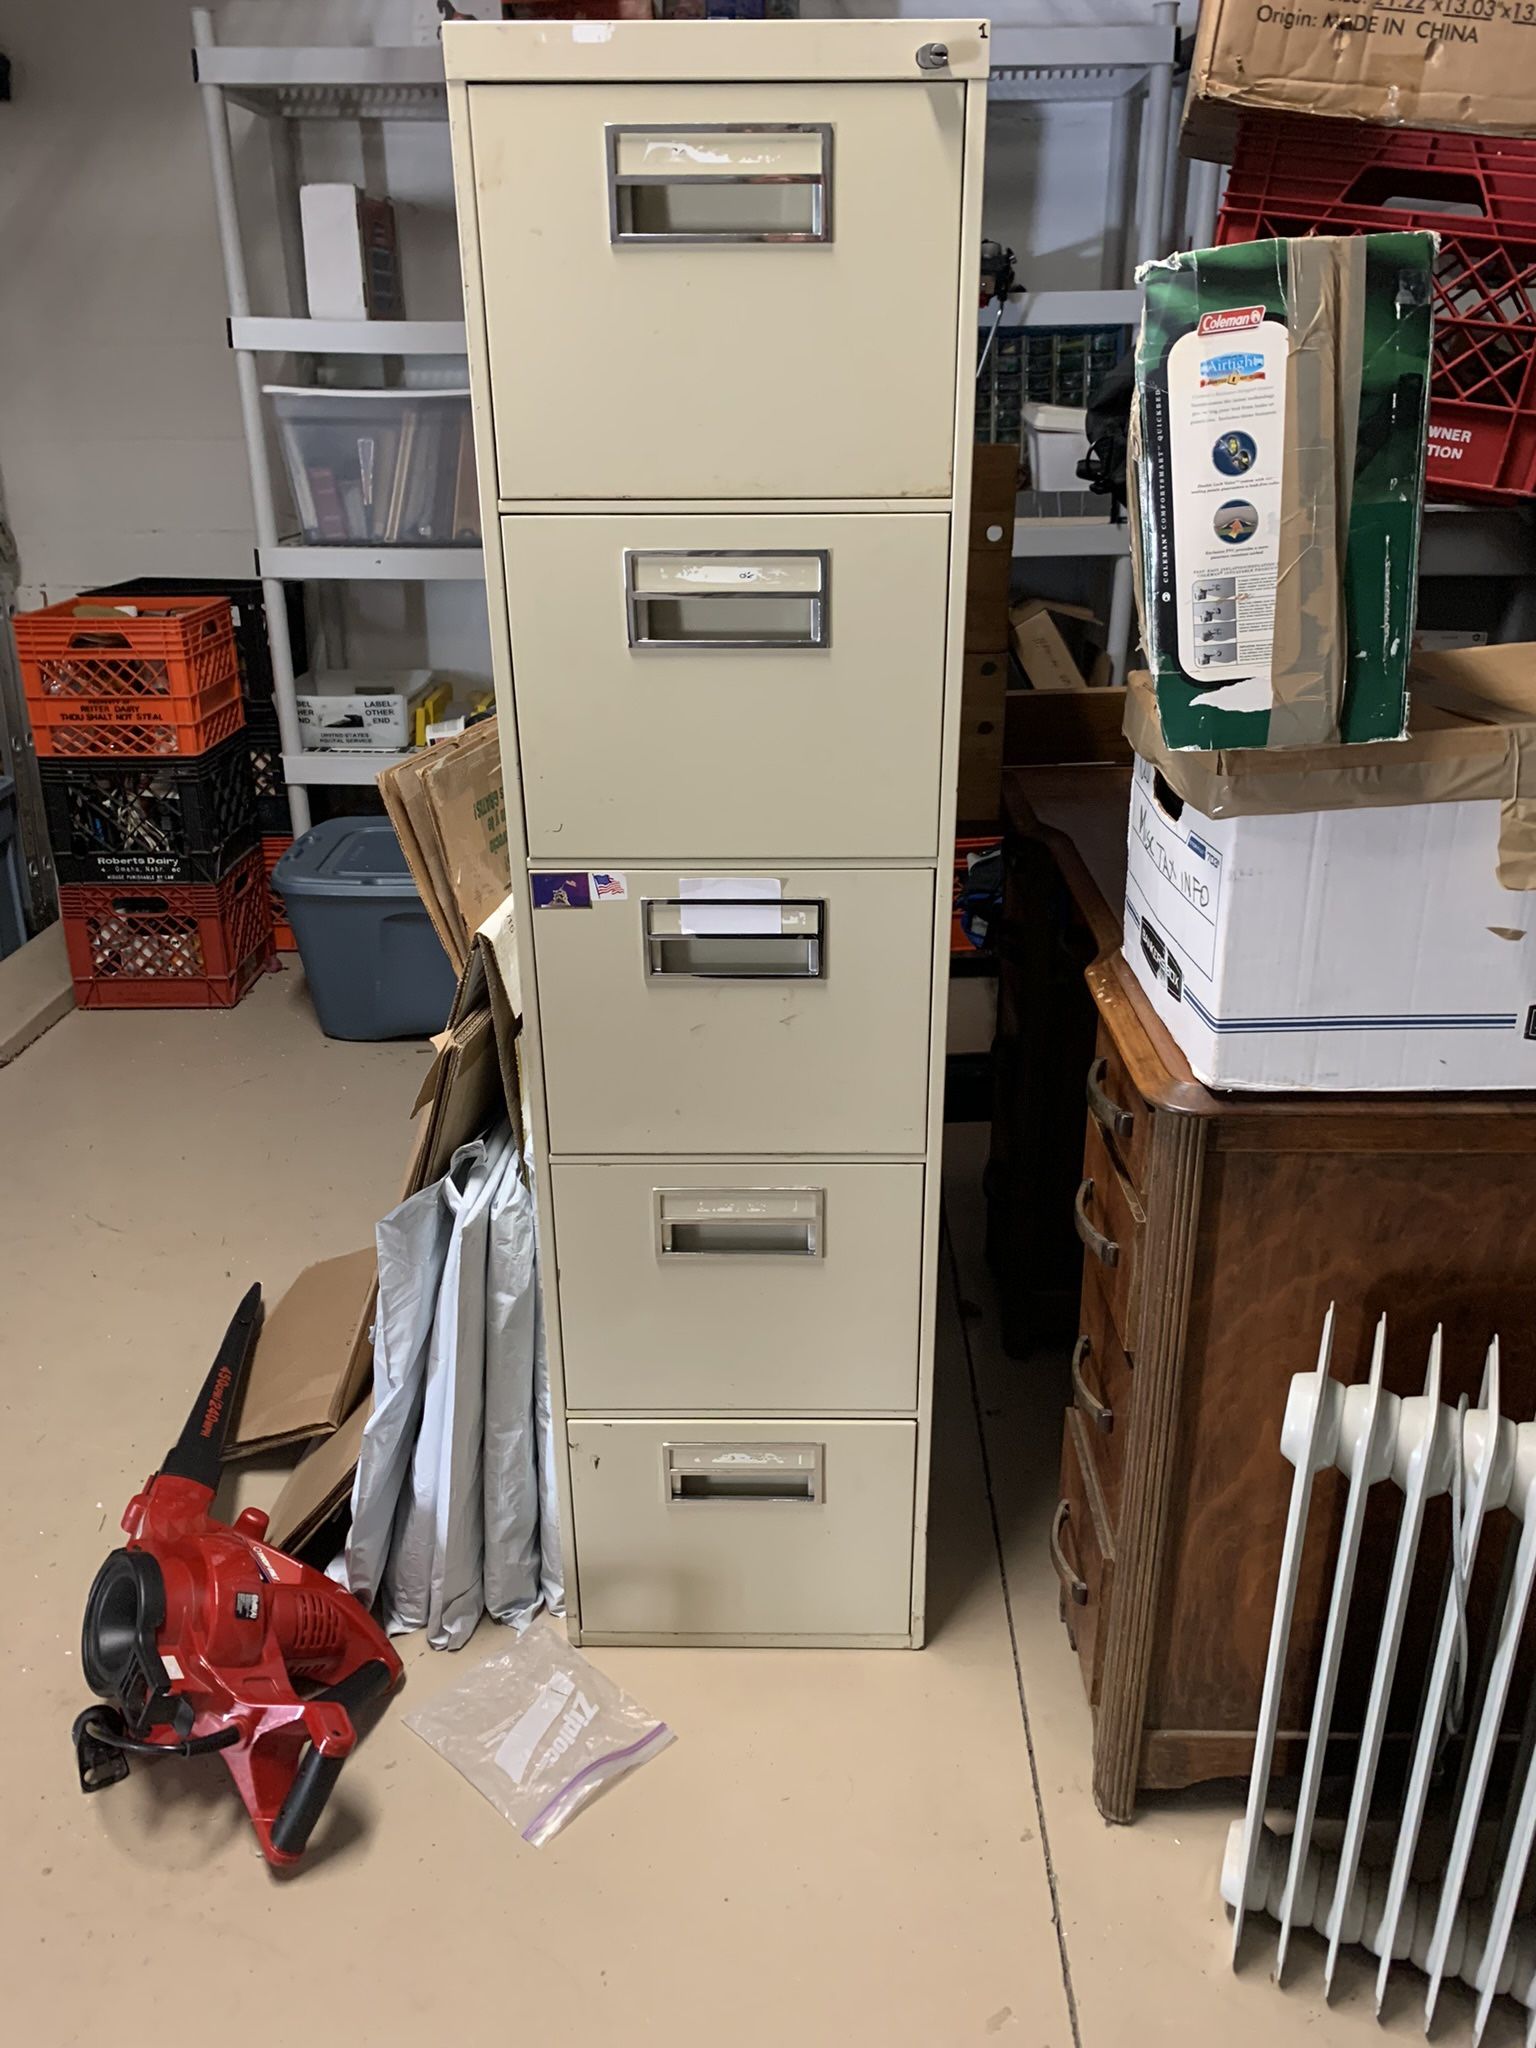 5 Drawer Steelcase File Cabinet